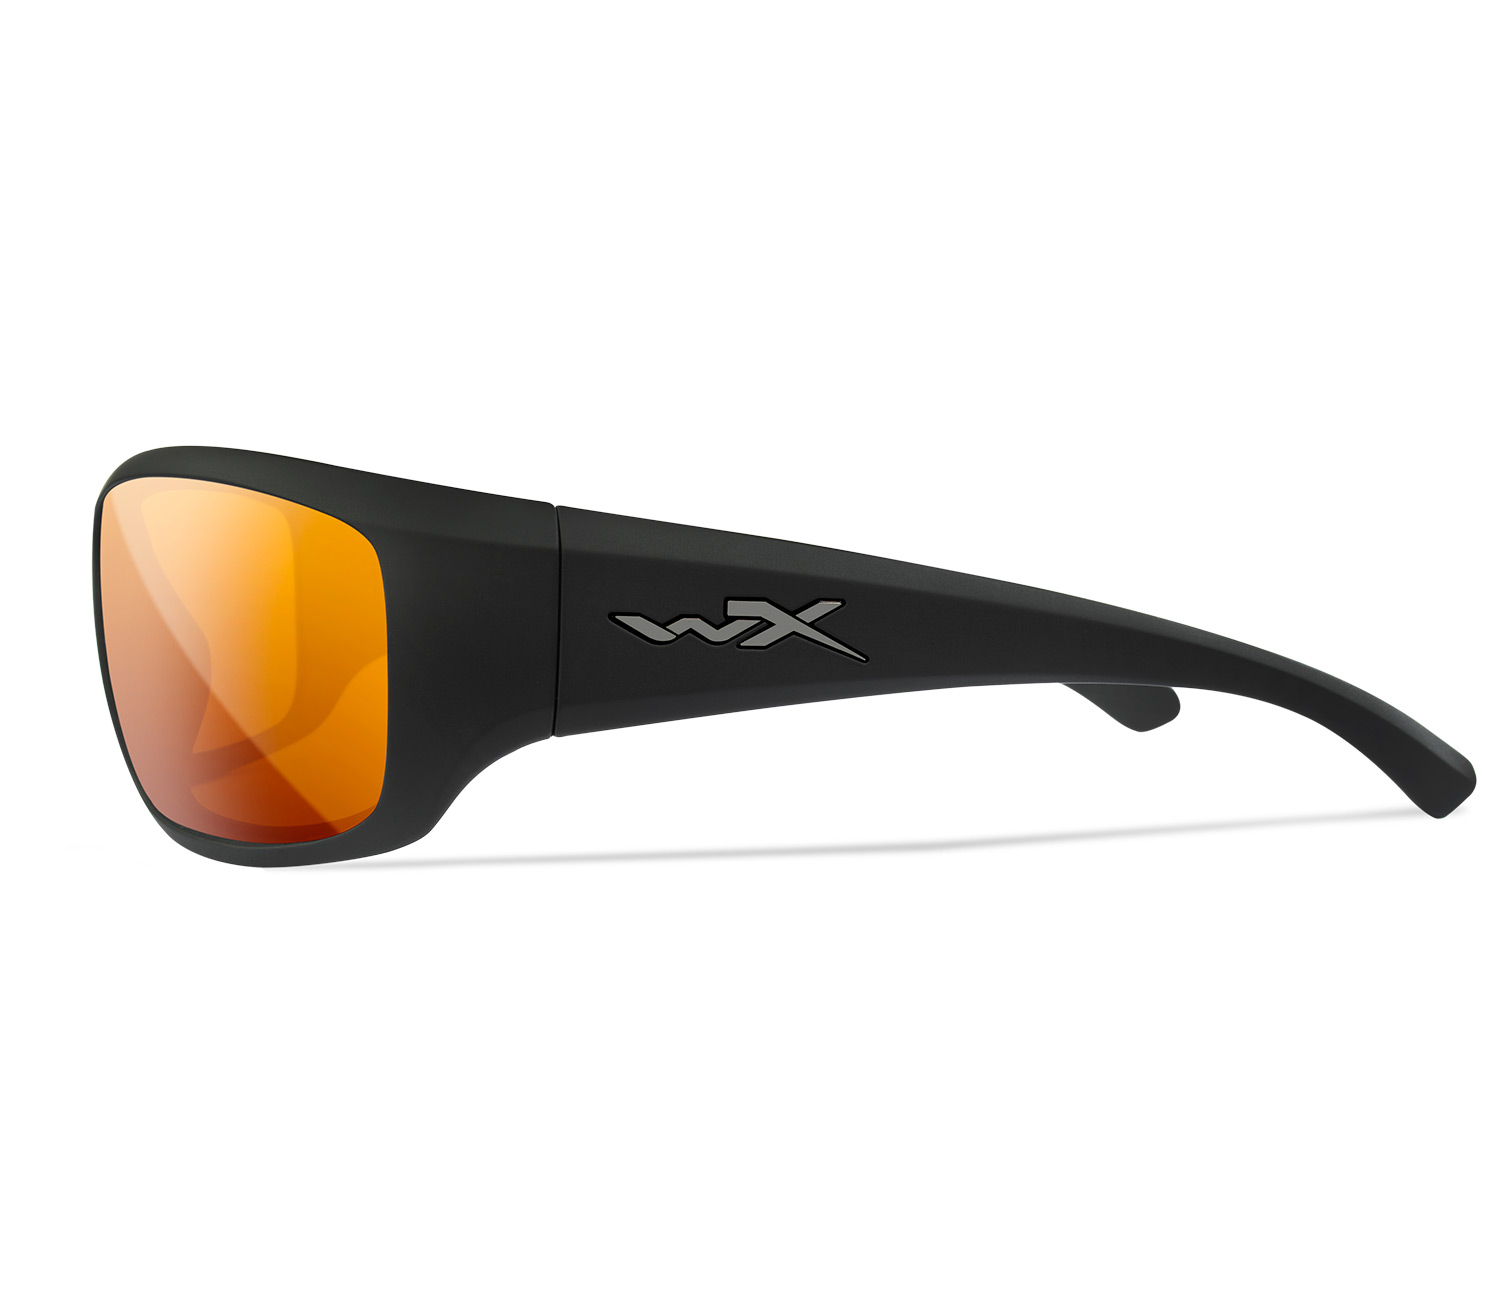 Gafas Wiley X Omega Captivate lateral